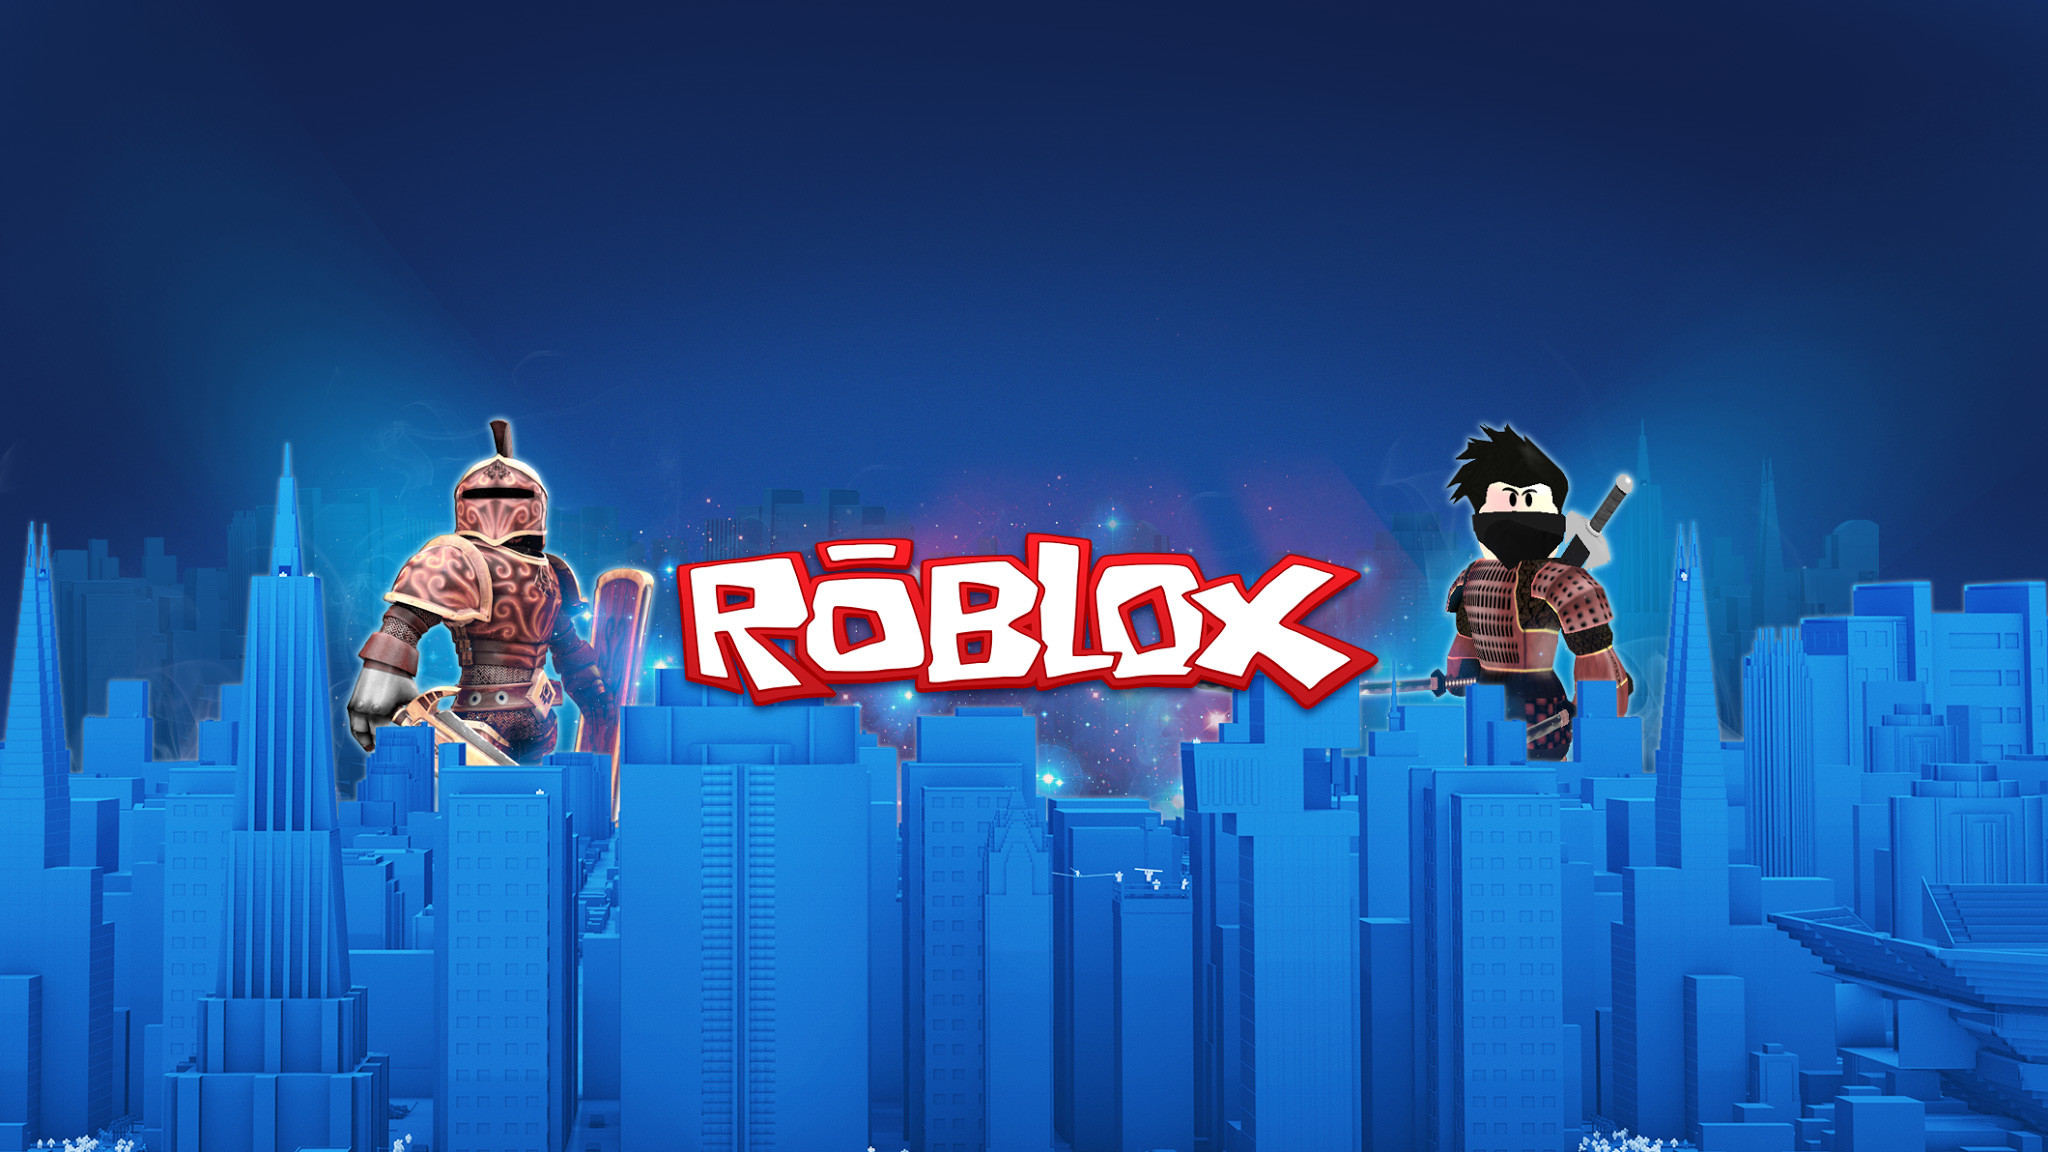 Download Roblox Theme For Windows 10 - roblox home screen backgrounds